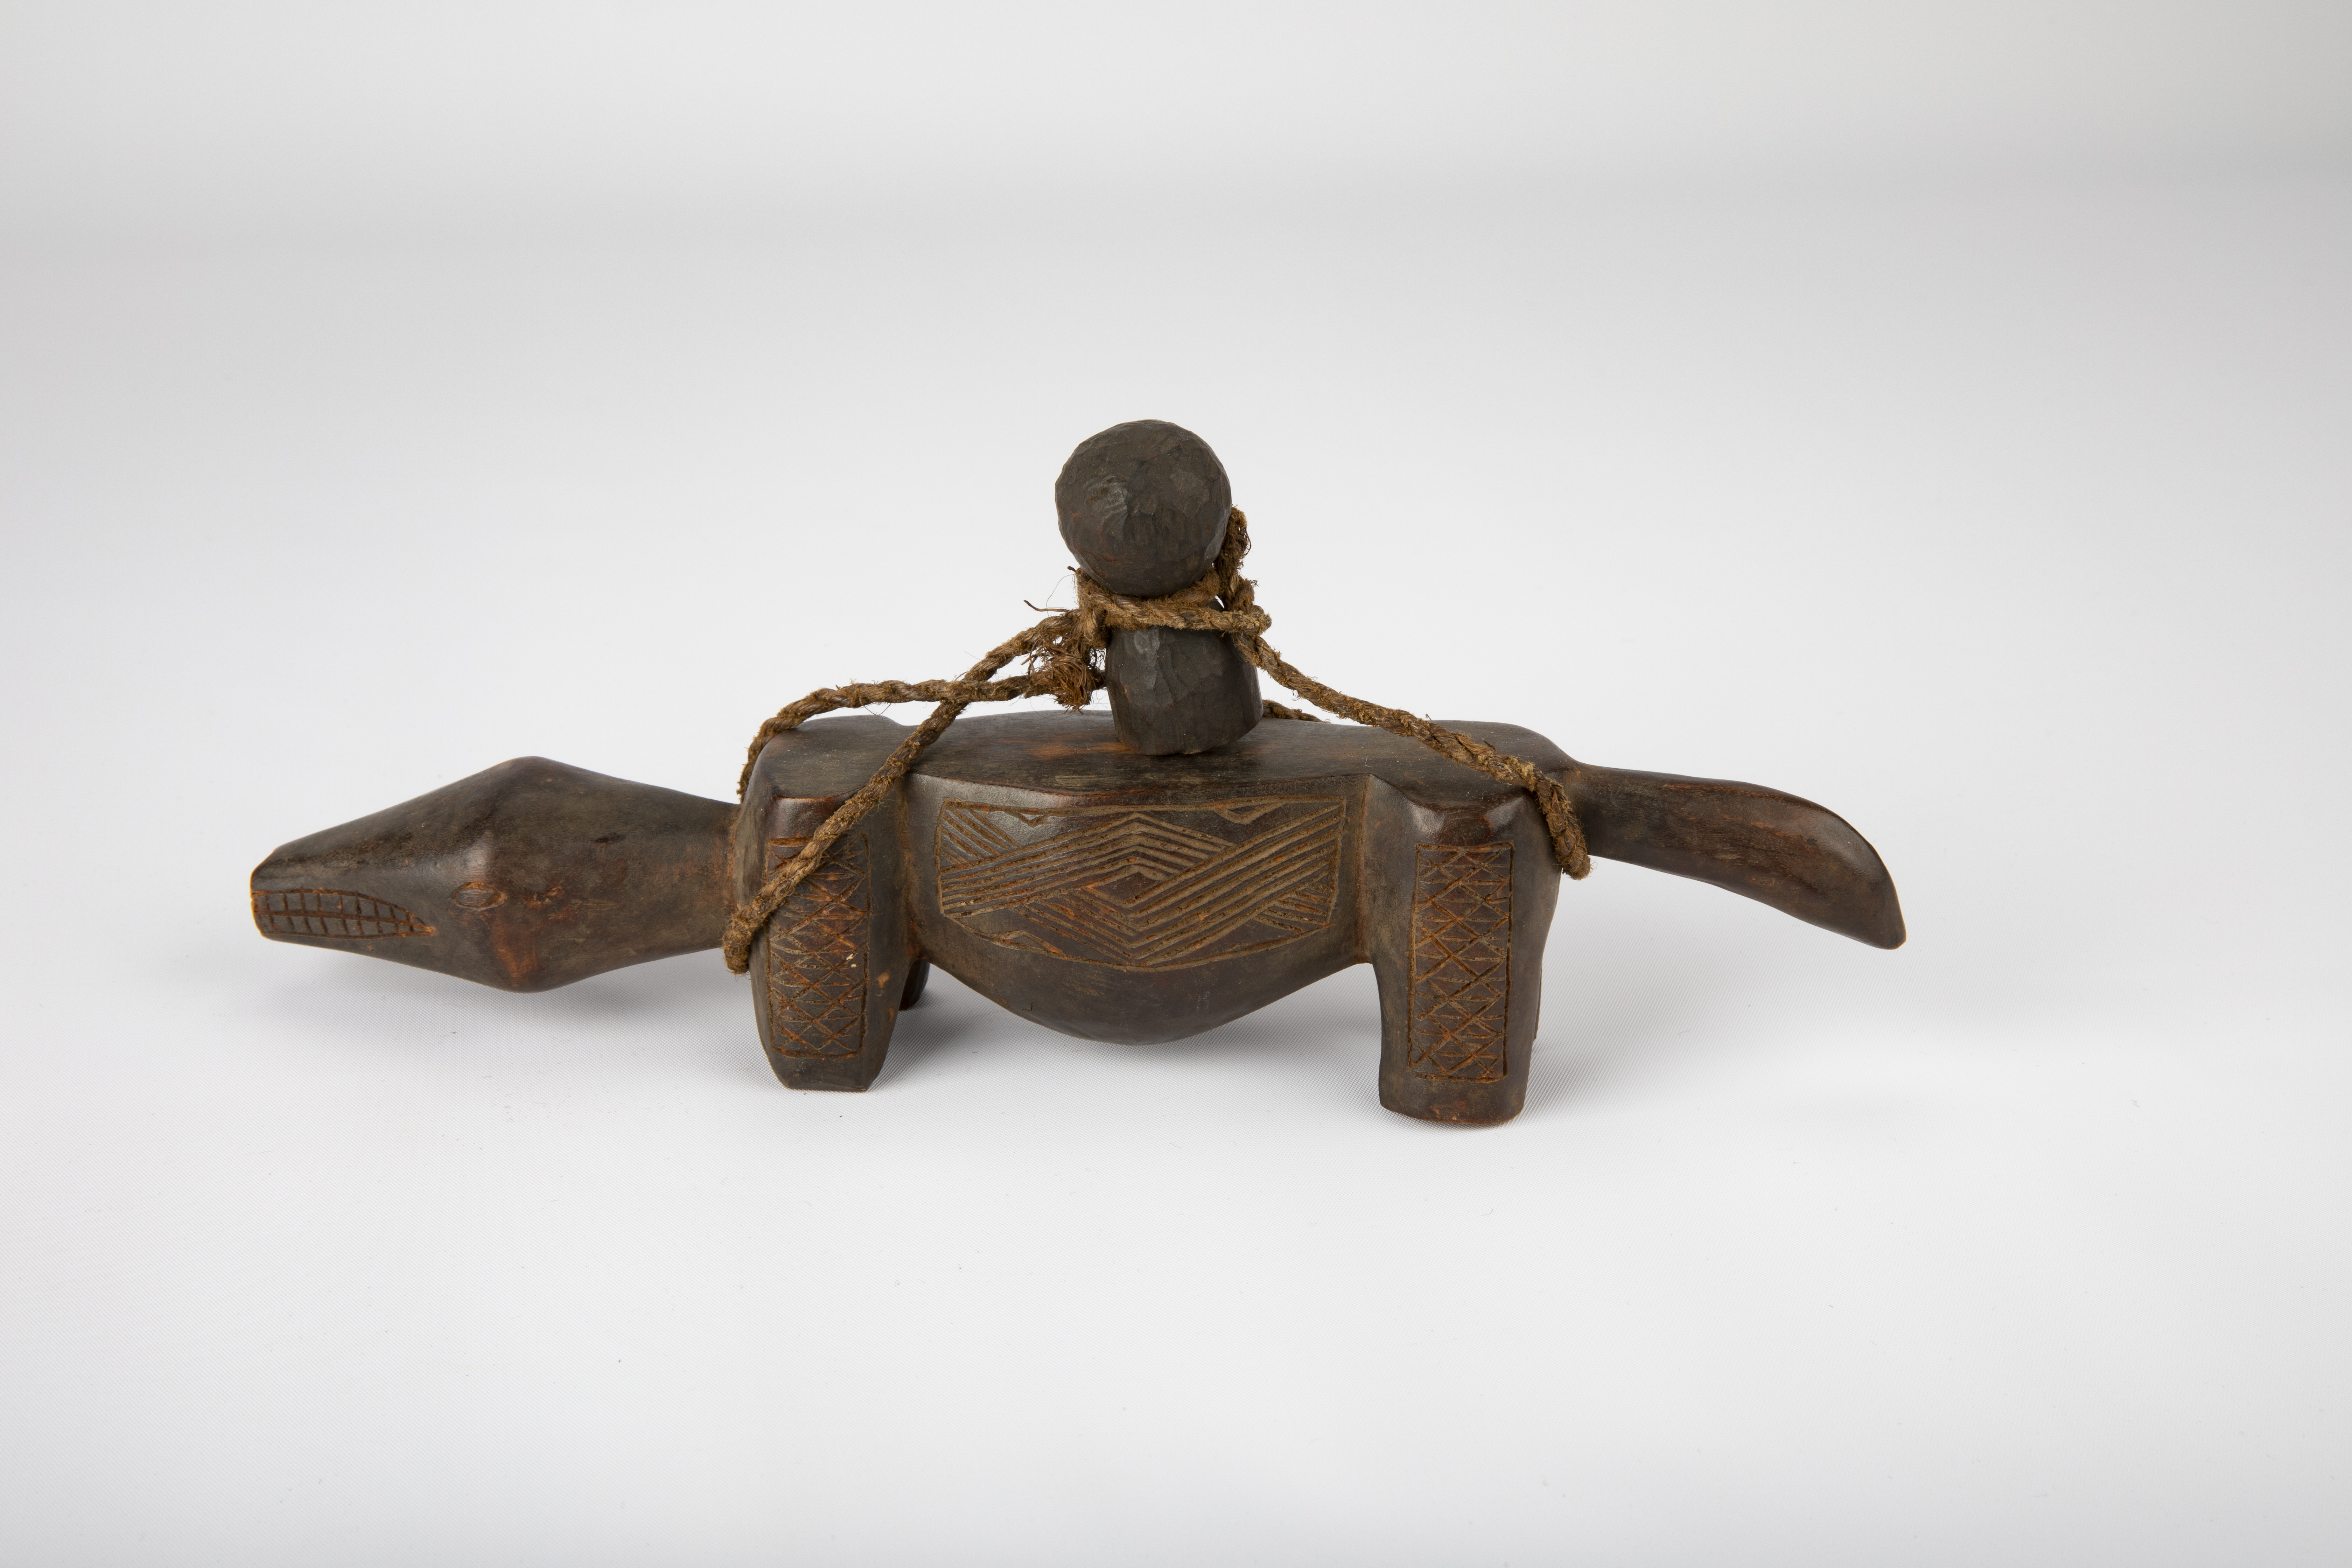 Divination instrument in the shape of an animal with long  protruding head and tail with small rubbing staff attached, Africa (Zaire, Babuba or Lele), 19th century